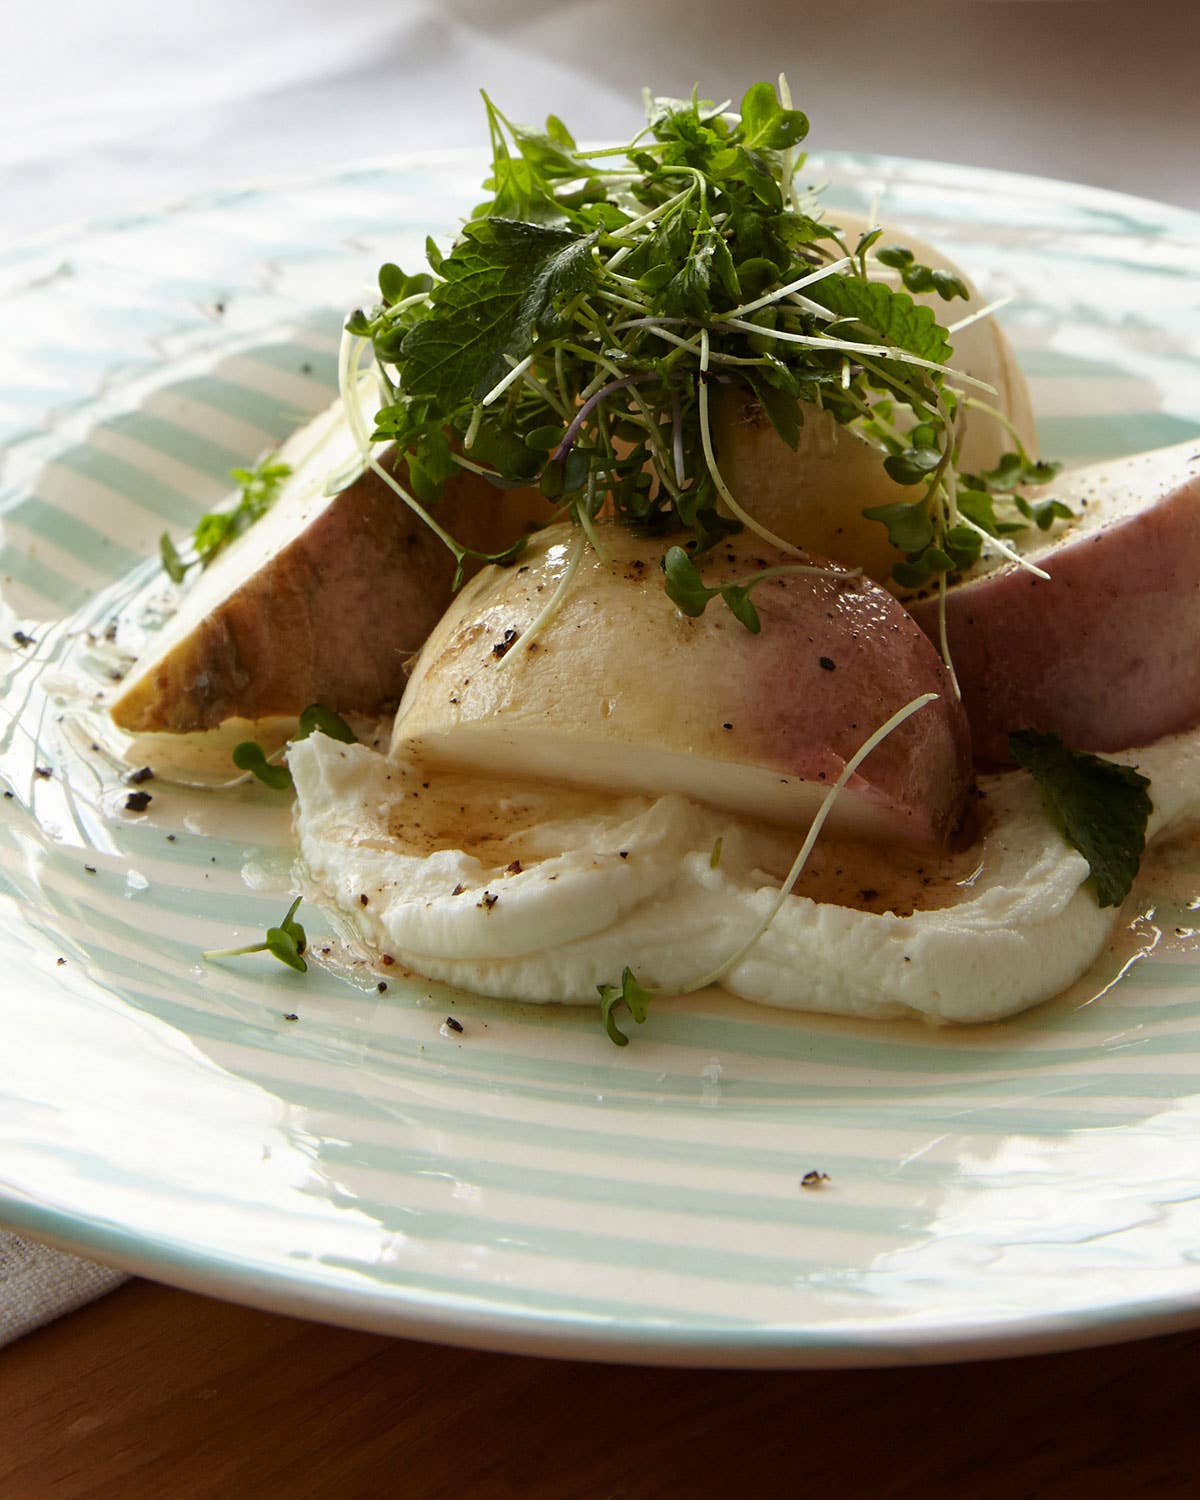 Salt-Roasted Turnips with Goat Cheese and Greens